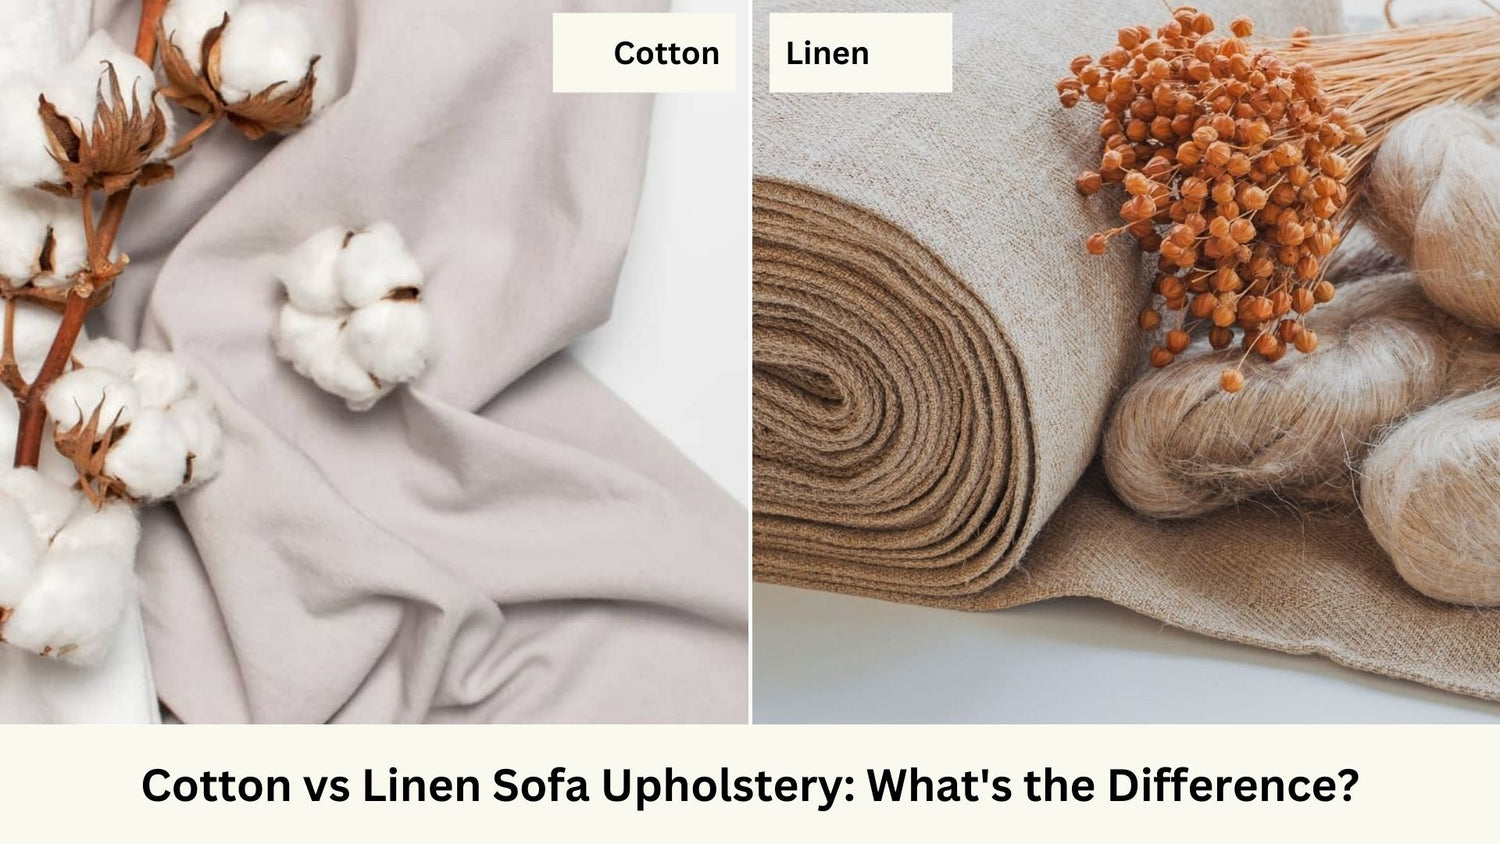 Cotton vs Linen Sofa Upholstery: What's the Difference?